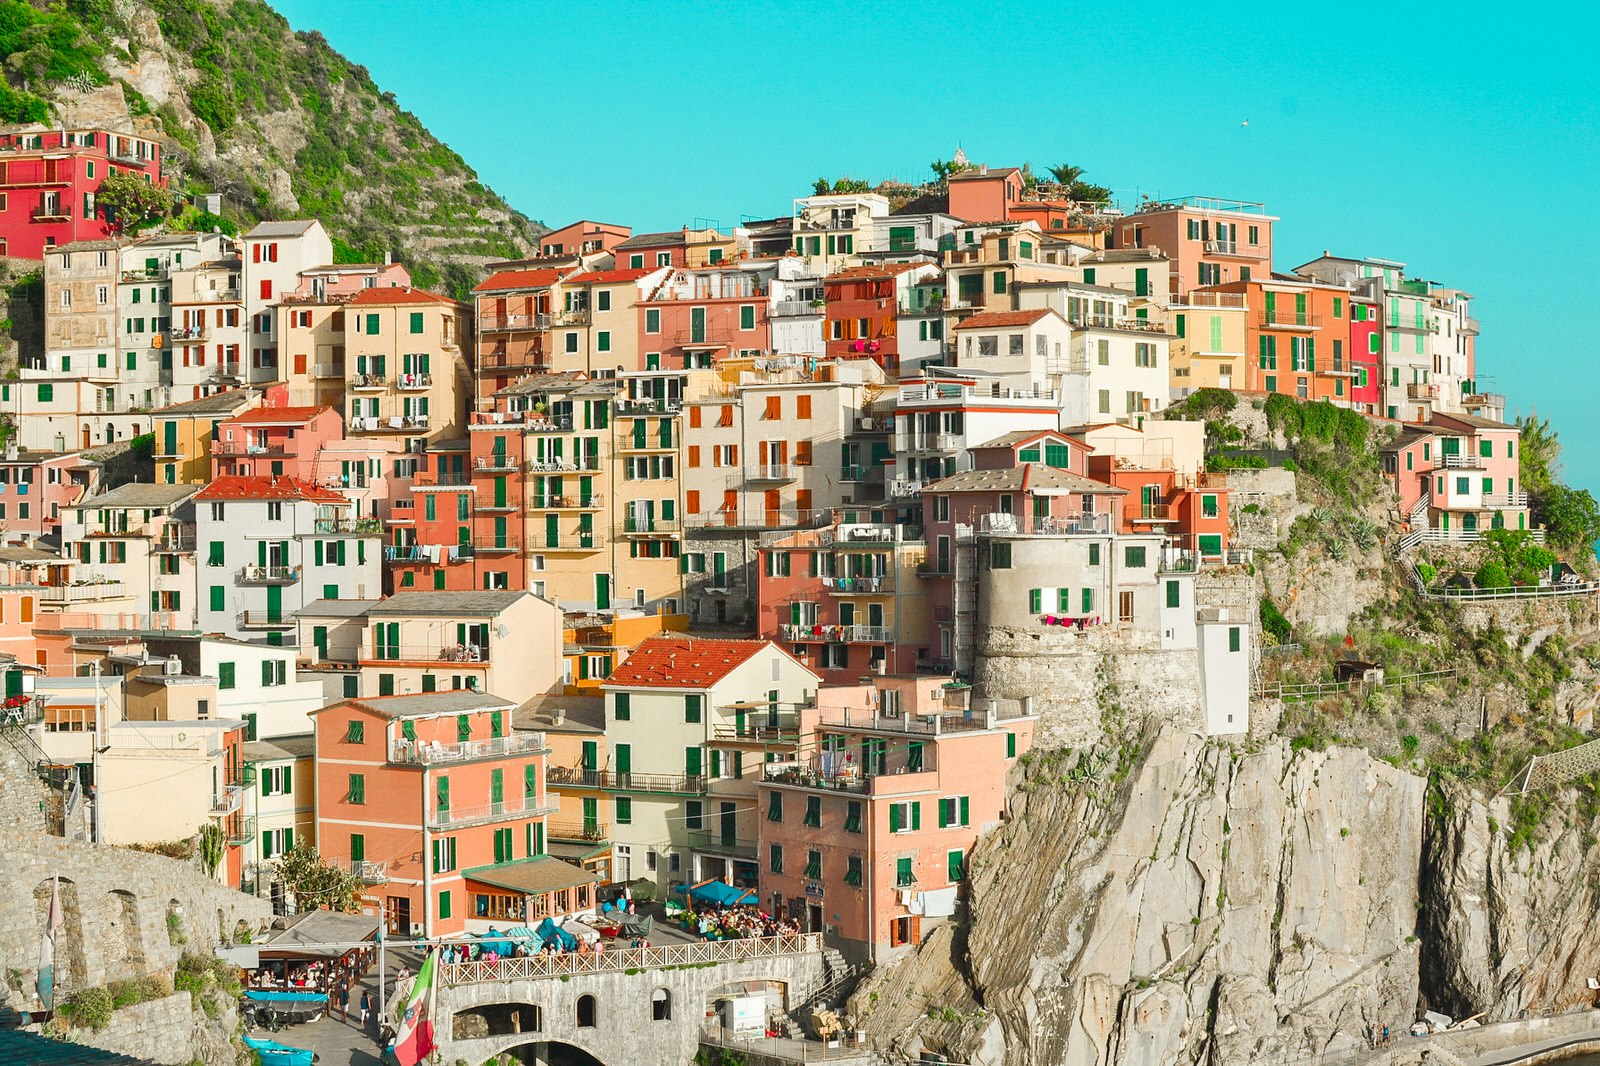 A view of of the colourful, cluttered houses on the Cinque Terre backpacking trail at Manarola